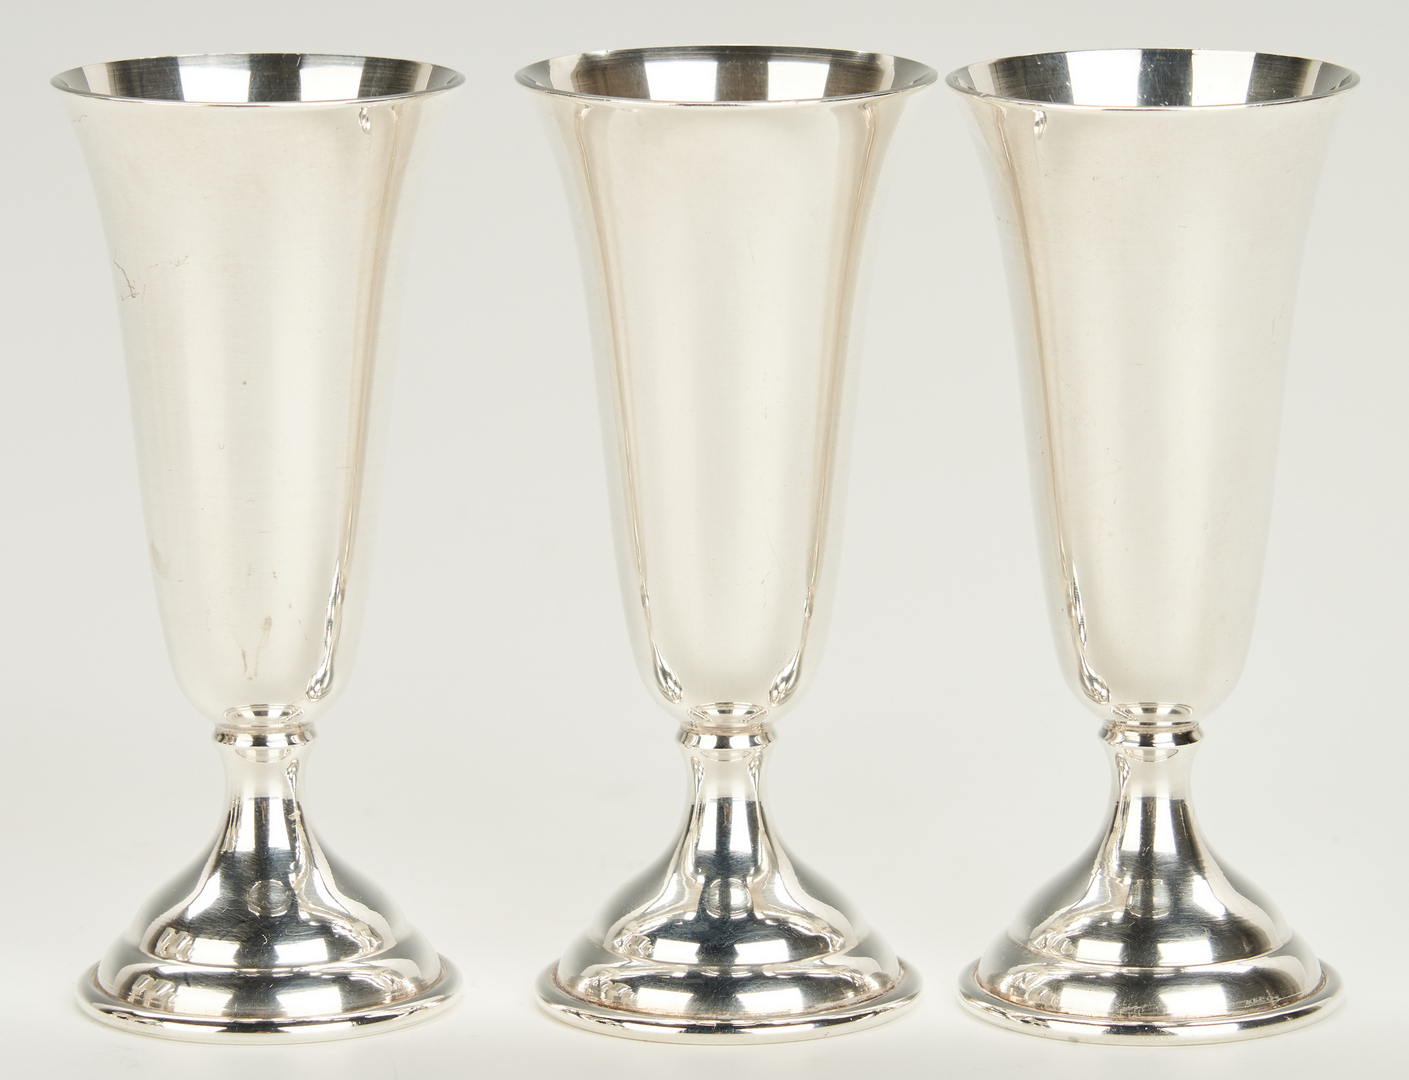 Lot 799: 22 Sterling Items, incl. Goblets, Cordials